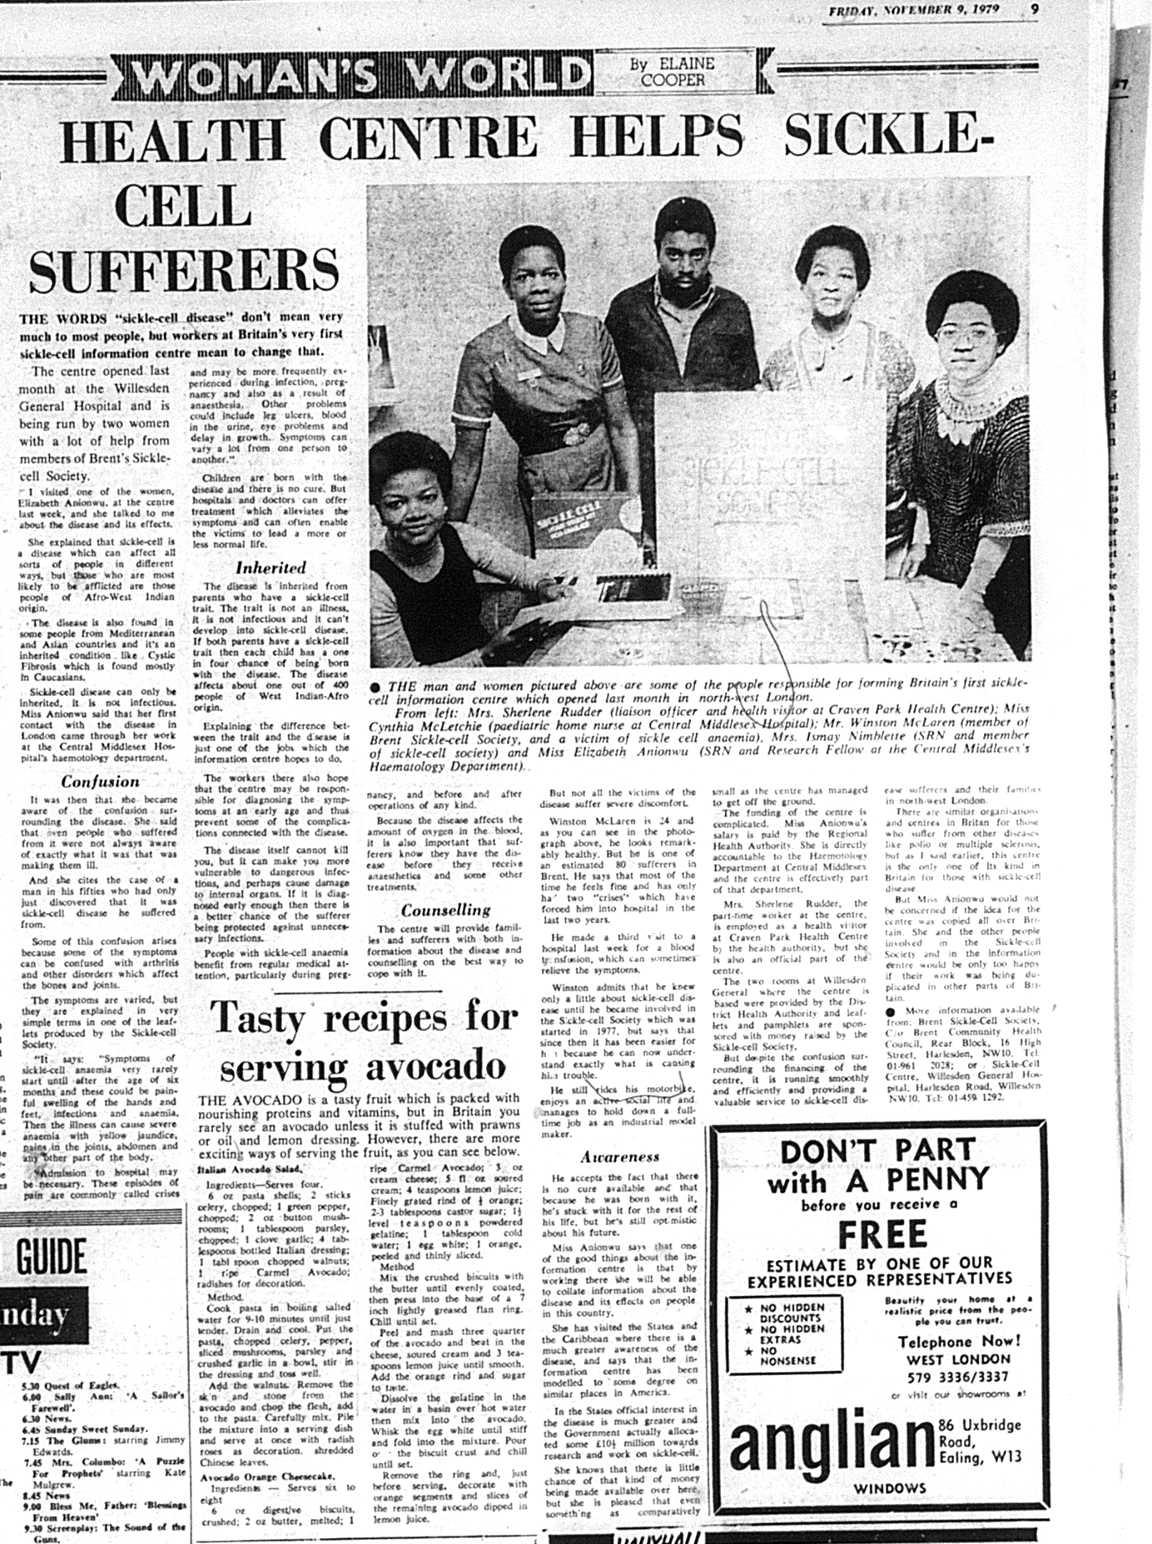 Local newspaper article from 1979. It announces a new the health centre in Willesden.